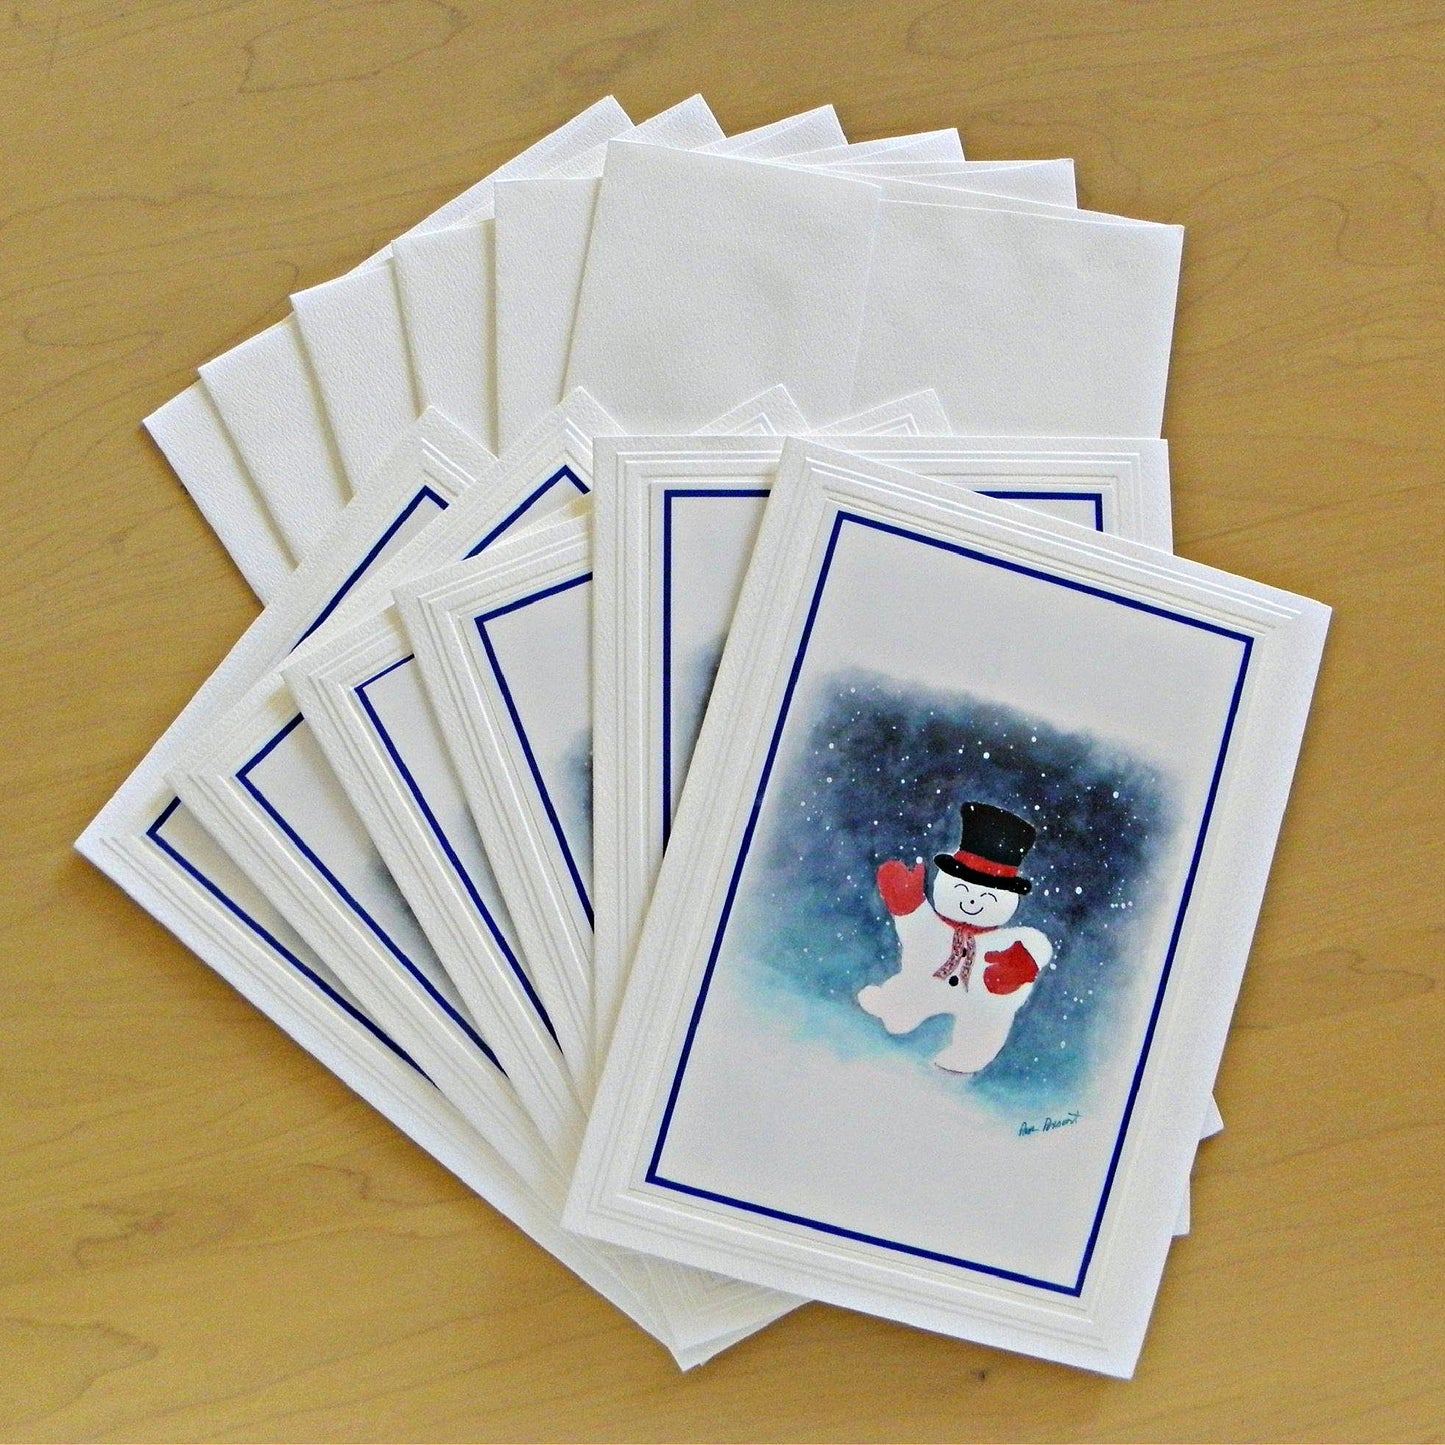 6-piece set of Snowman Greeting Cards